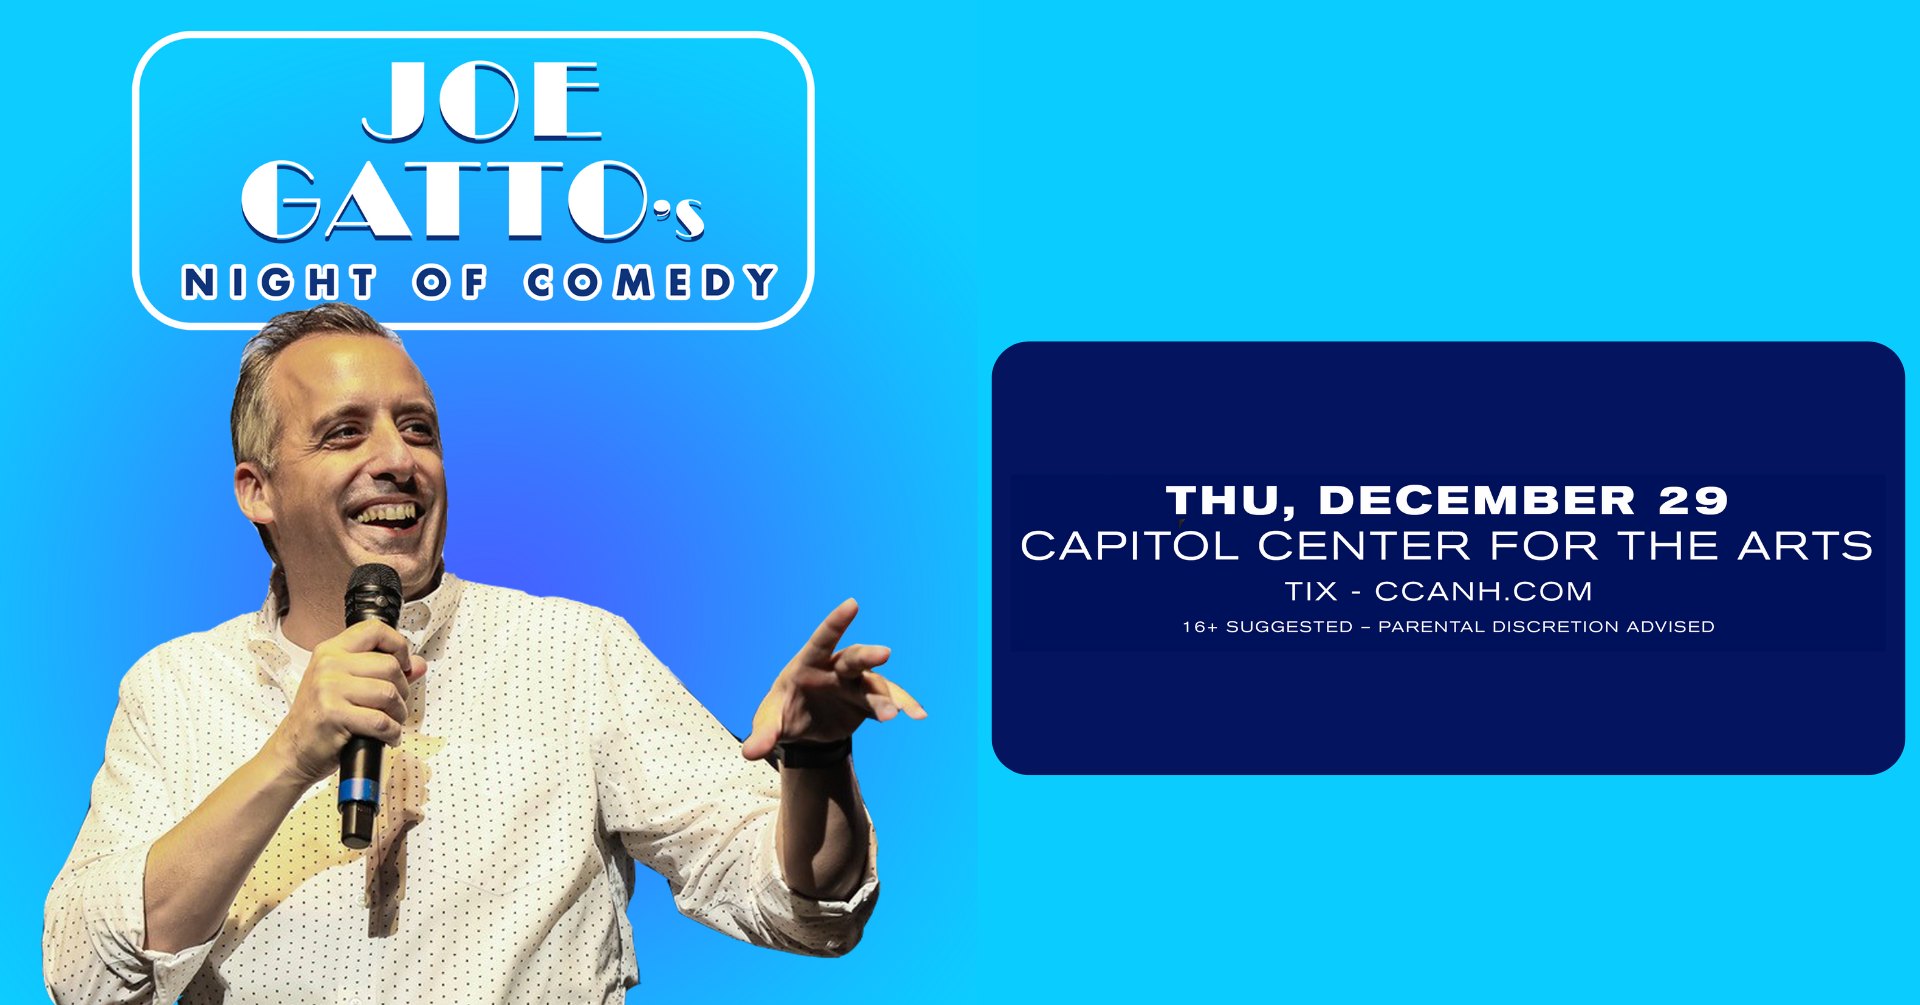 Win Tickets to See Comedian Joe Gatto at Capitol Center For the Arts